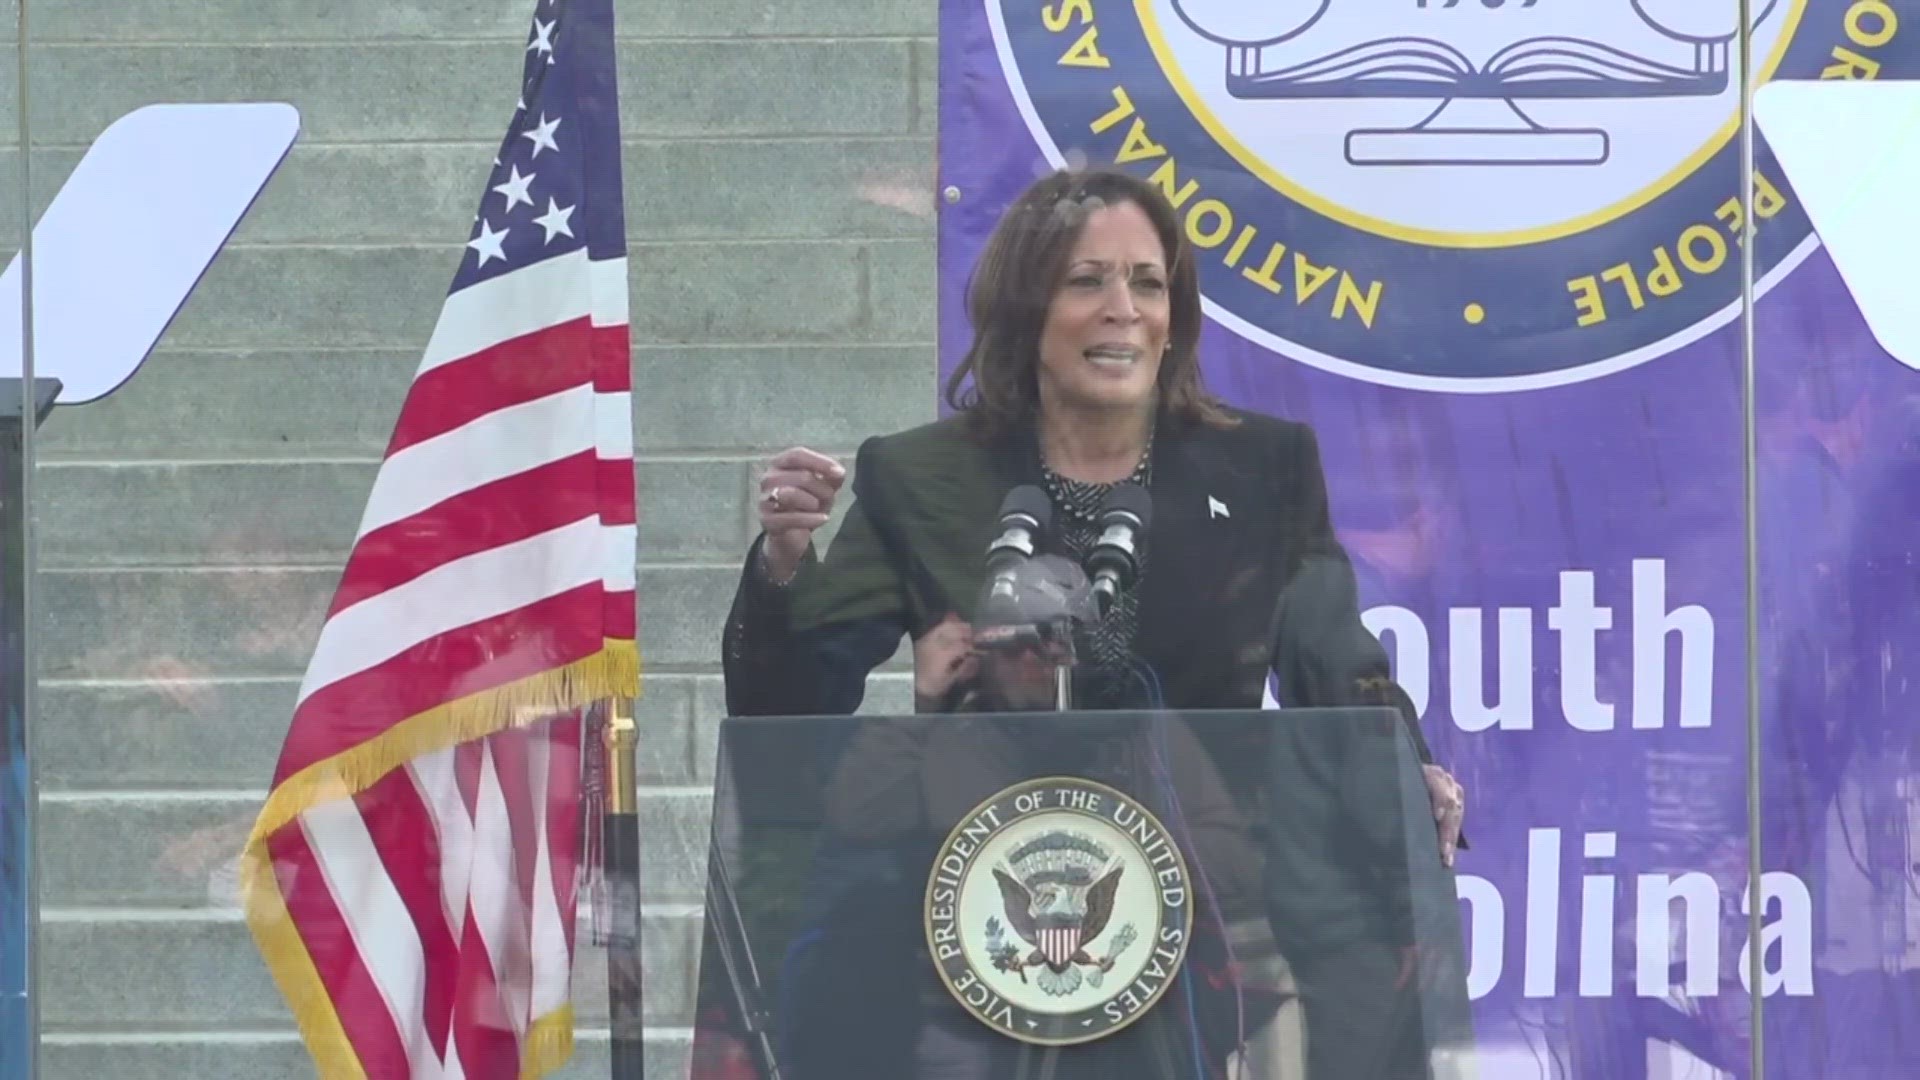 Vice-President Kamala Harris said freedom is under threat at the annual King Day at the Dome event in Columbia, South Carolina.